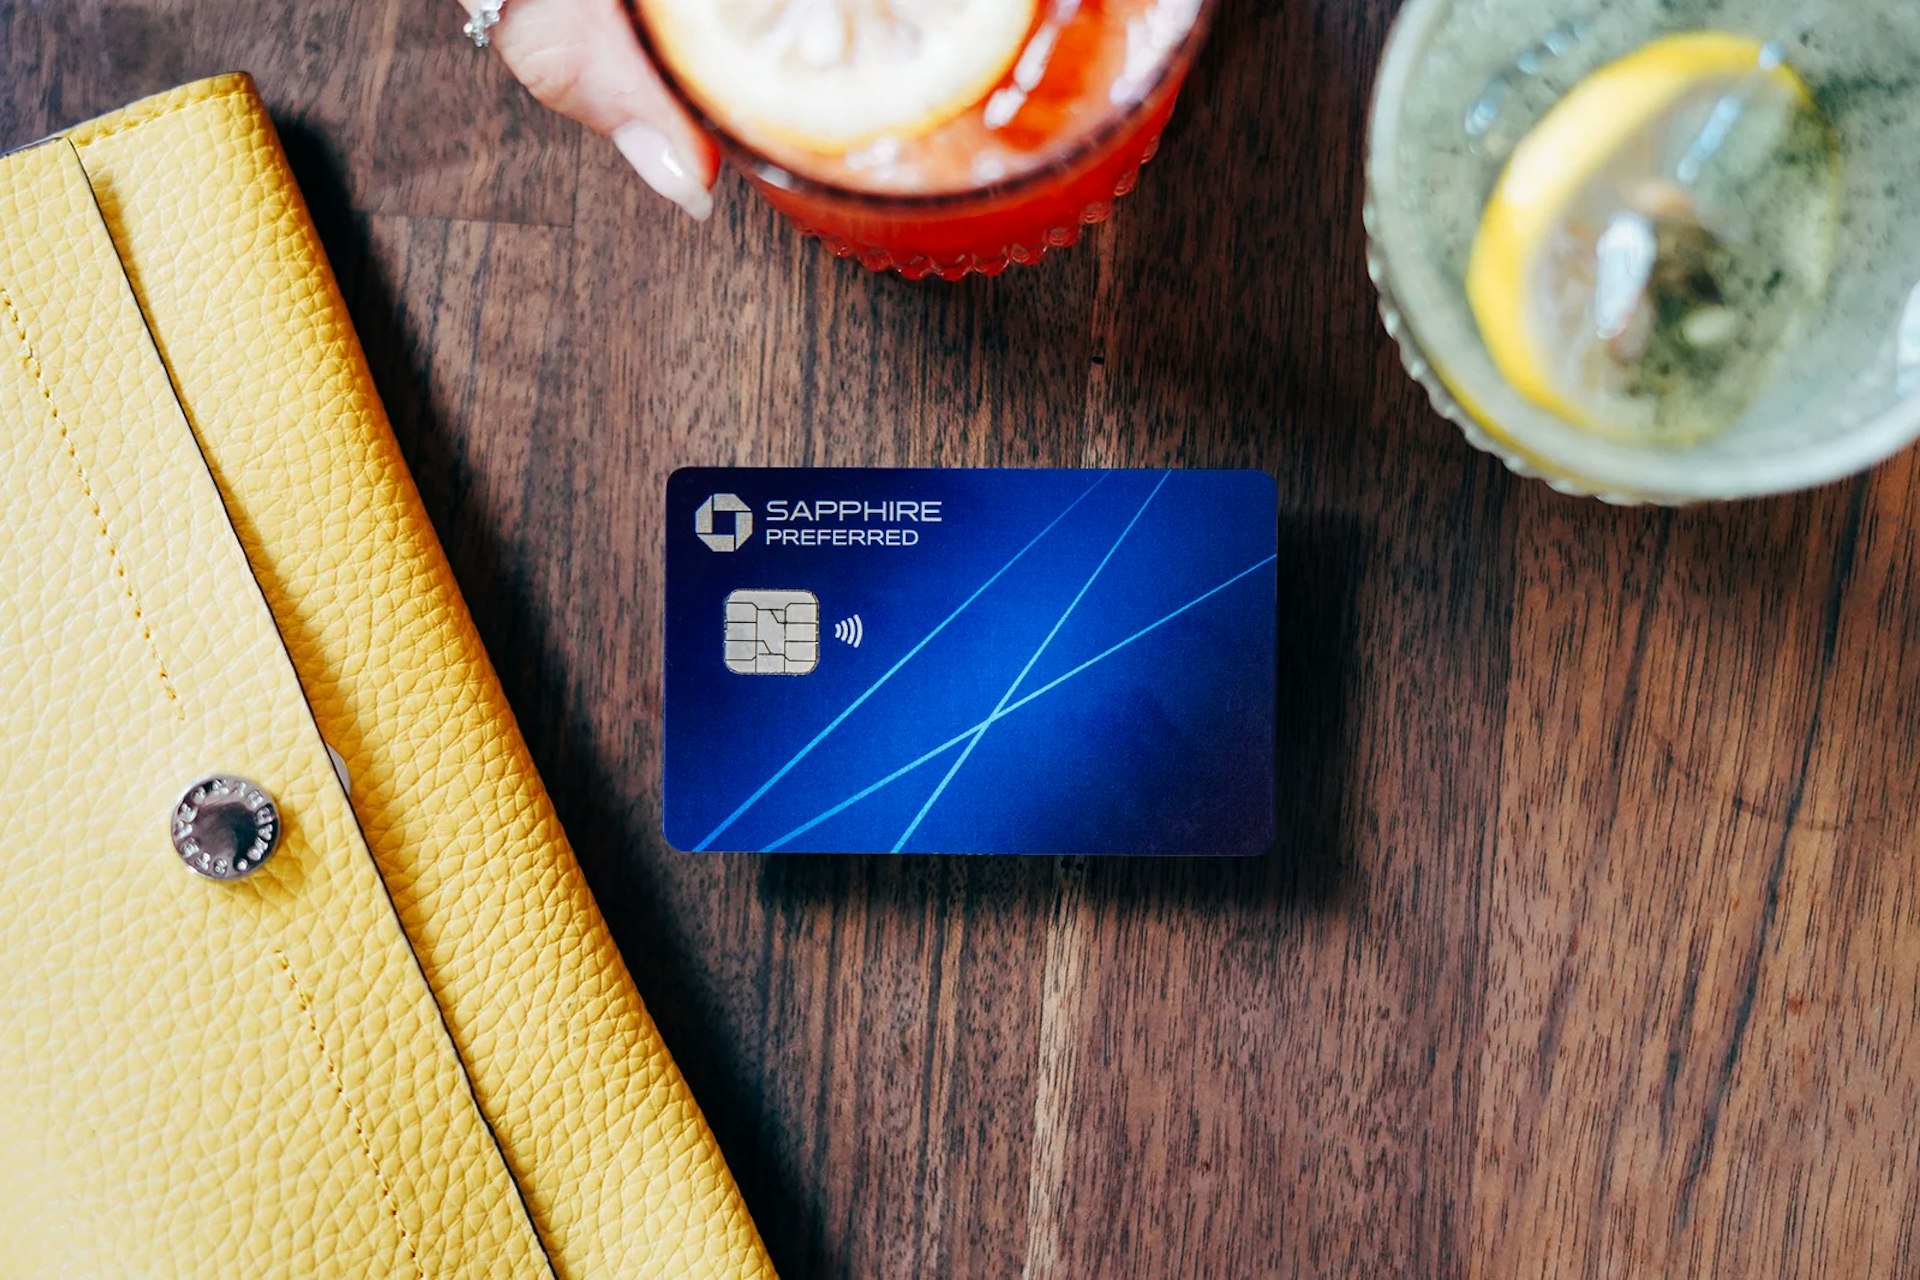 The Chase Sapphire Preferred Card